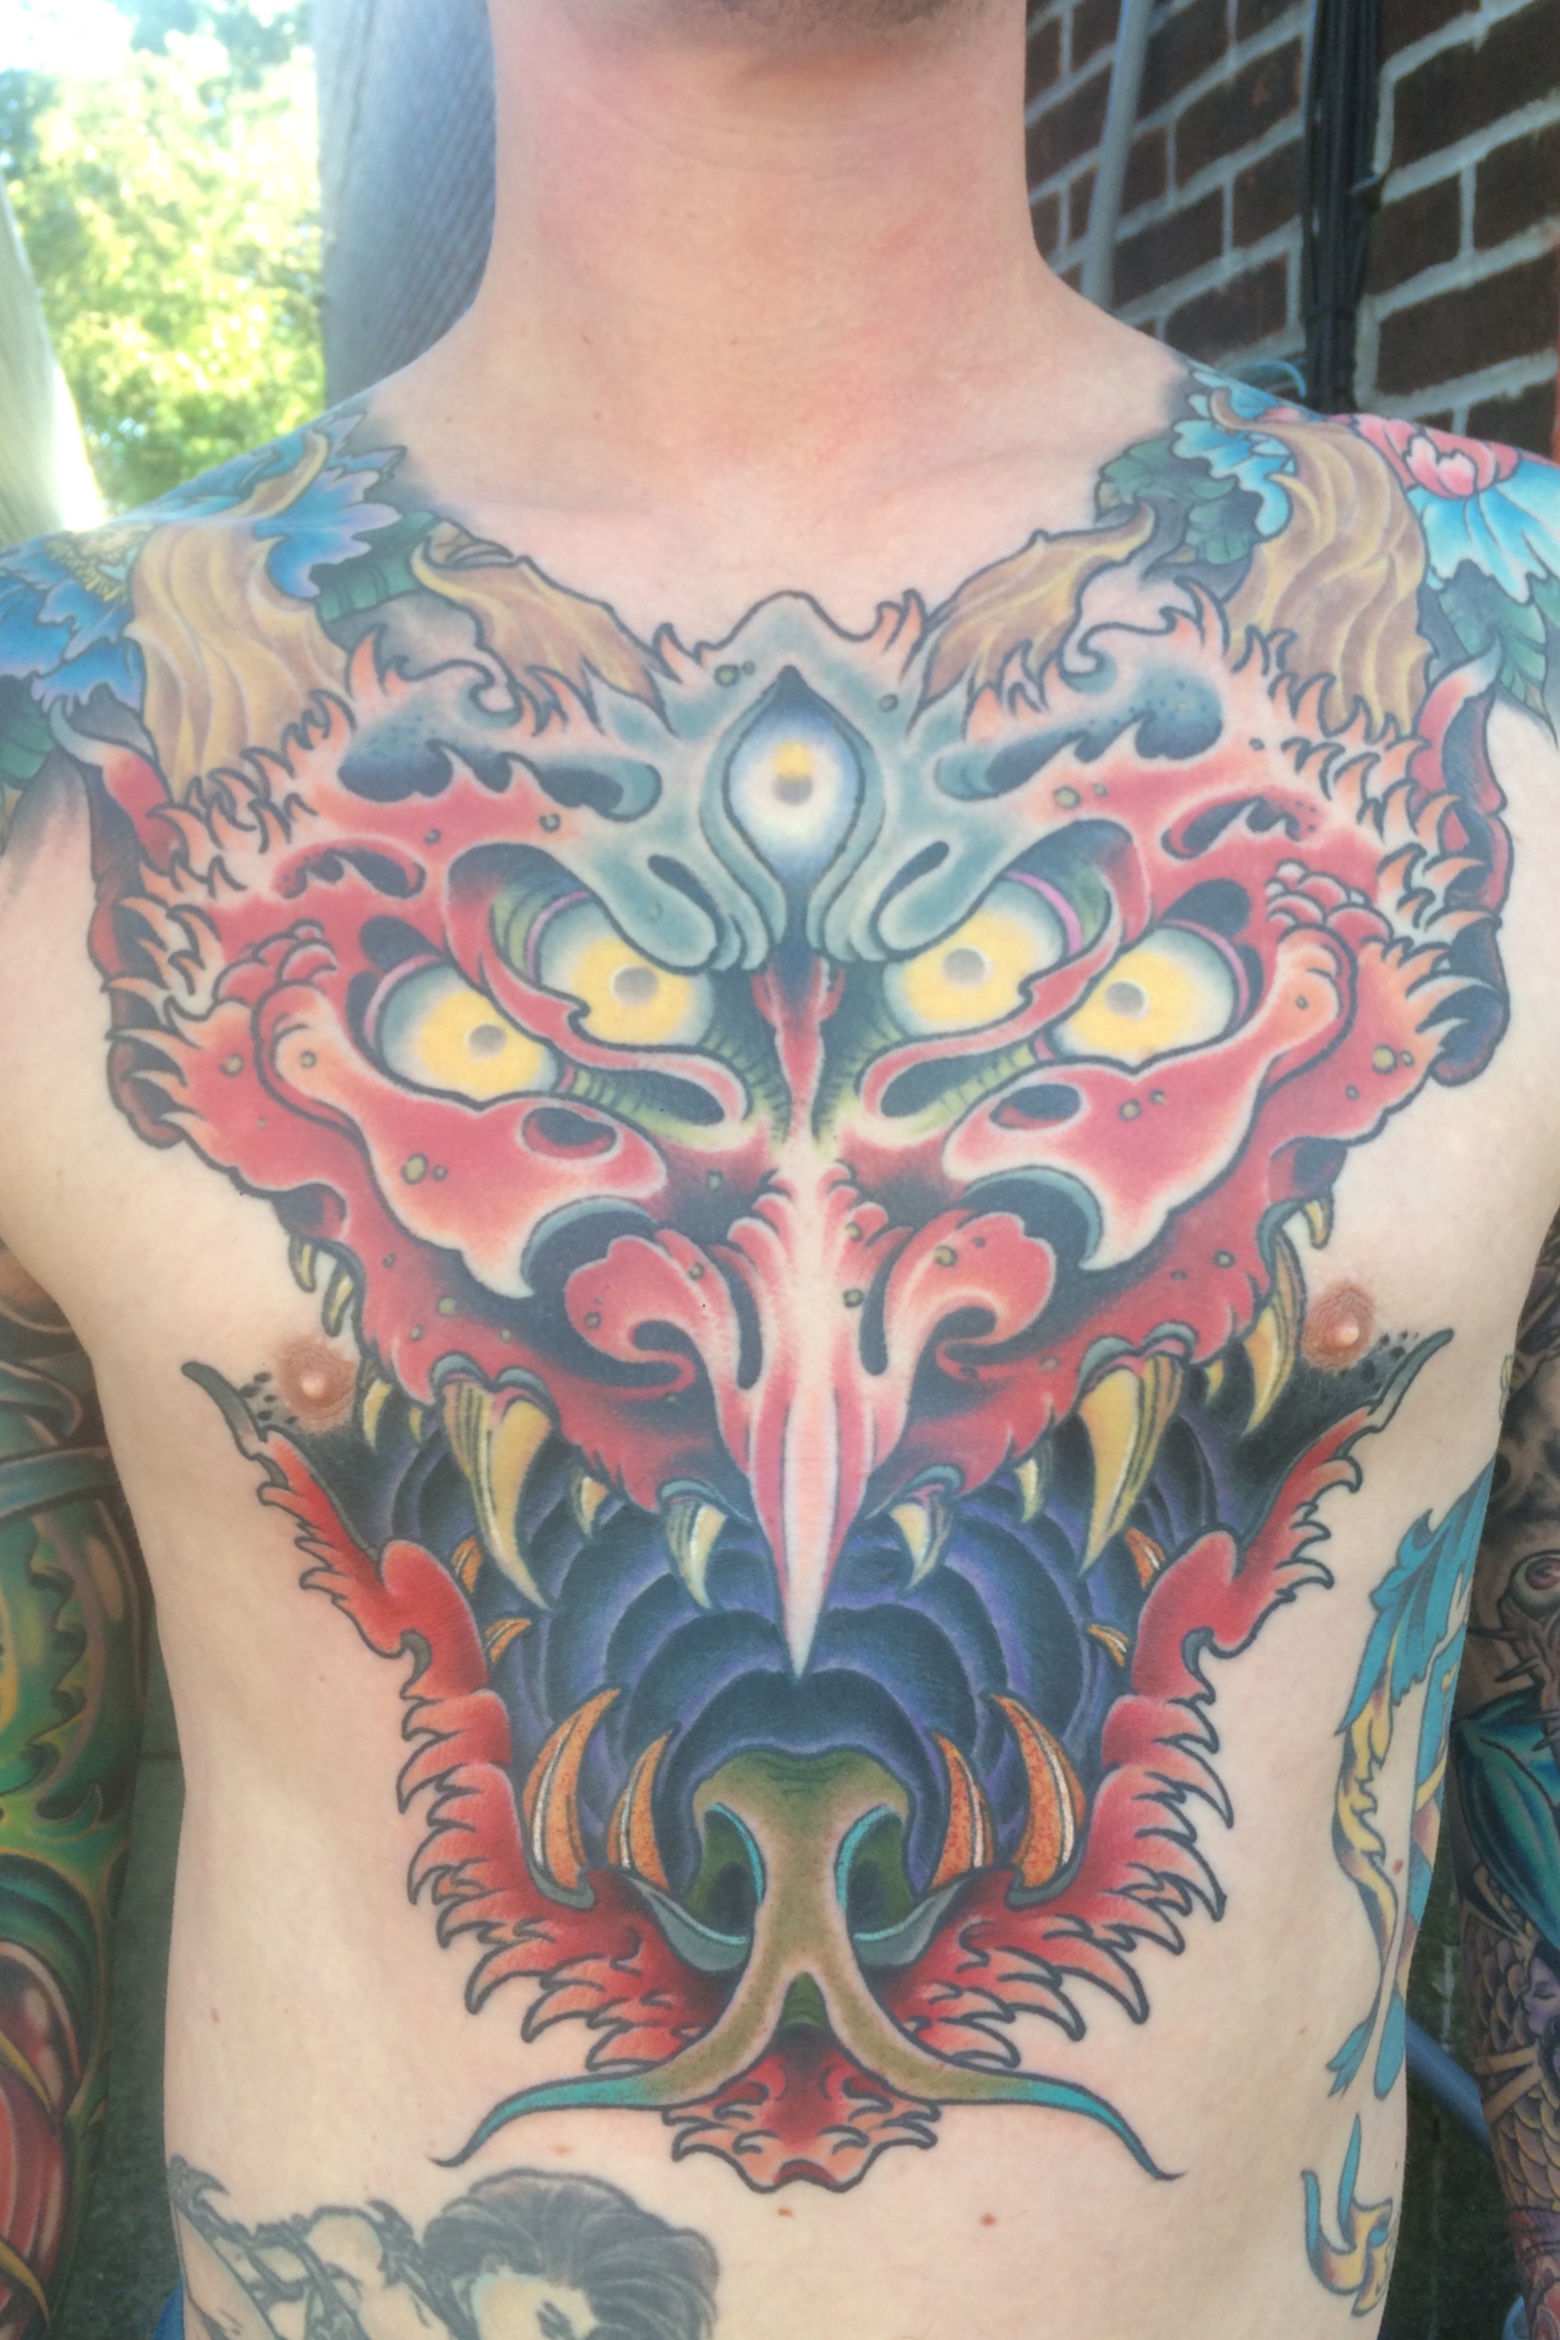 Tattoo uploaded by Phill Bartell  Steel City tattoo by Phill Bartell  Boulder CO  Tattoodo